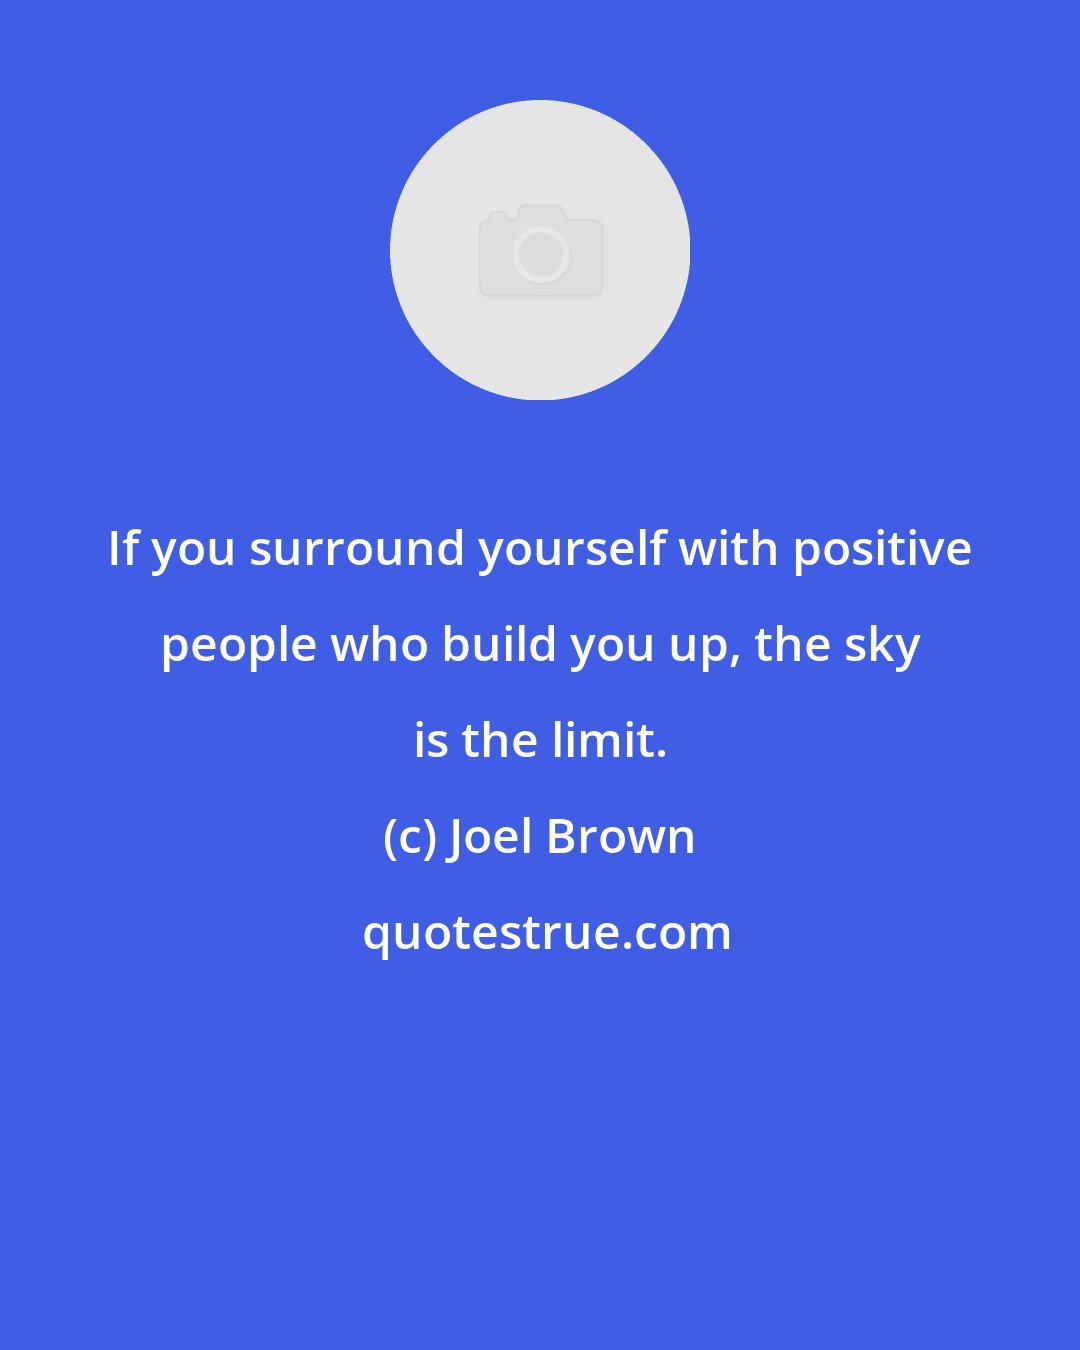 Joel Brown: If you surround yourself with positive people who build you up, the sky is the limit.